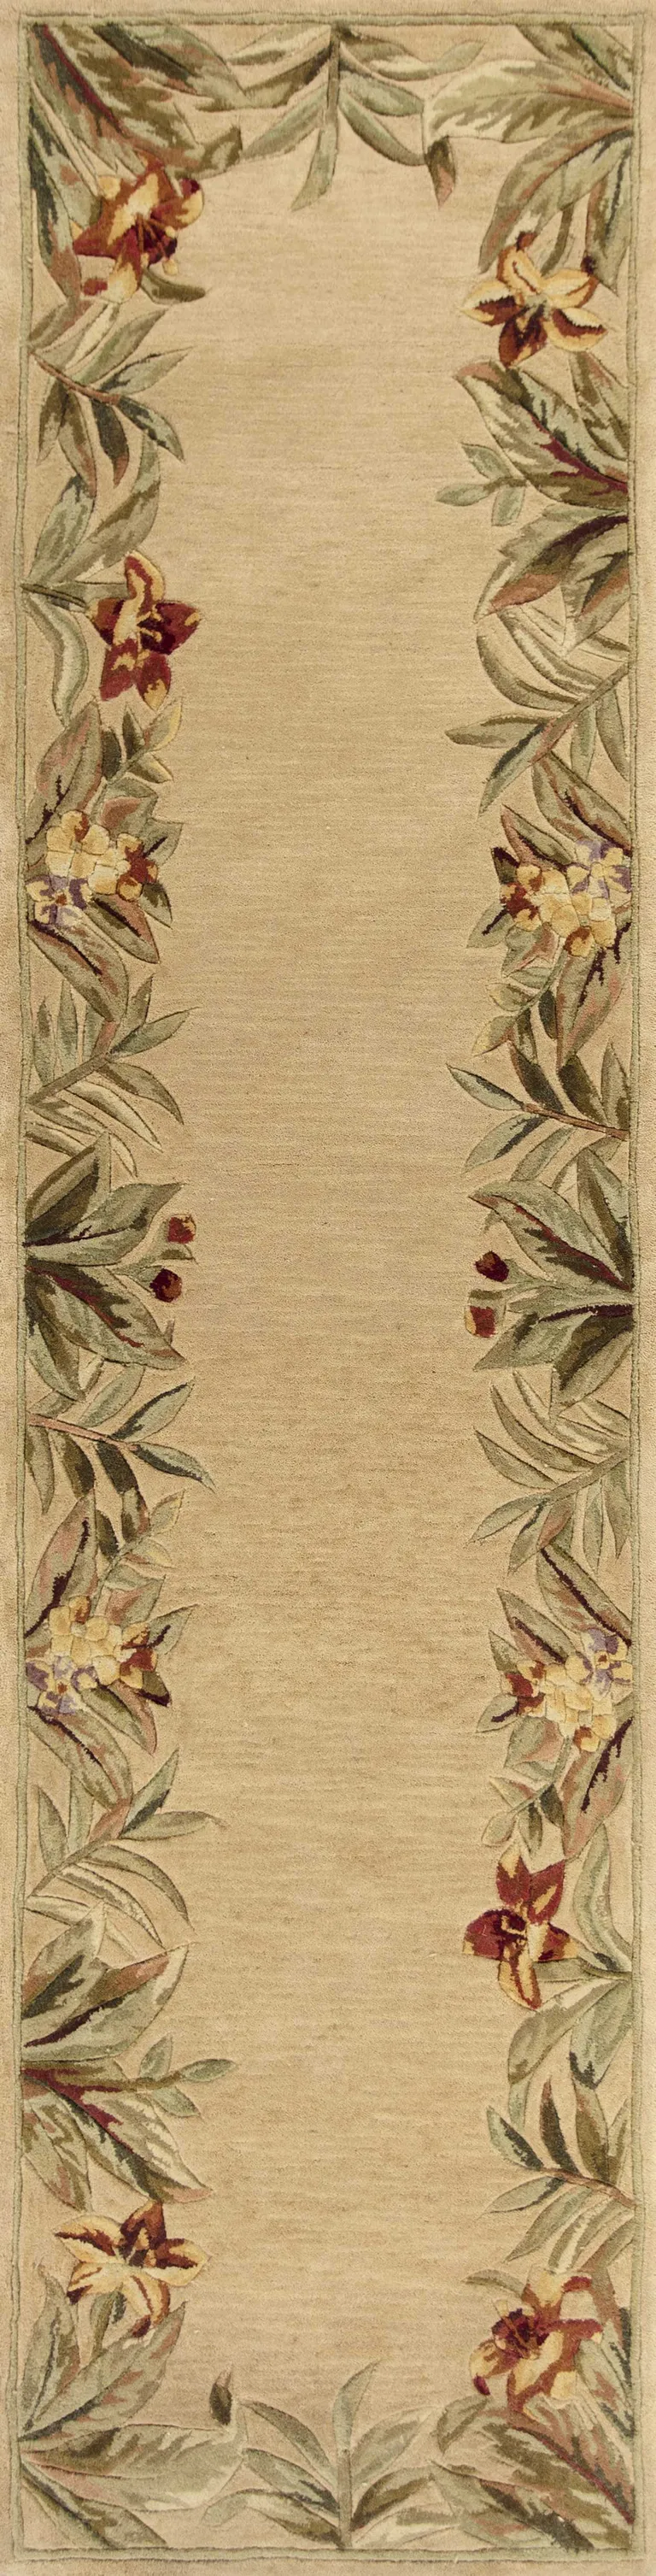 Ivory Hand Tufted Bordered Tropical Plants Indoor Runner Rug Photo 1